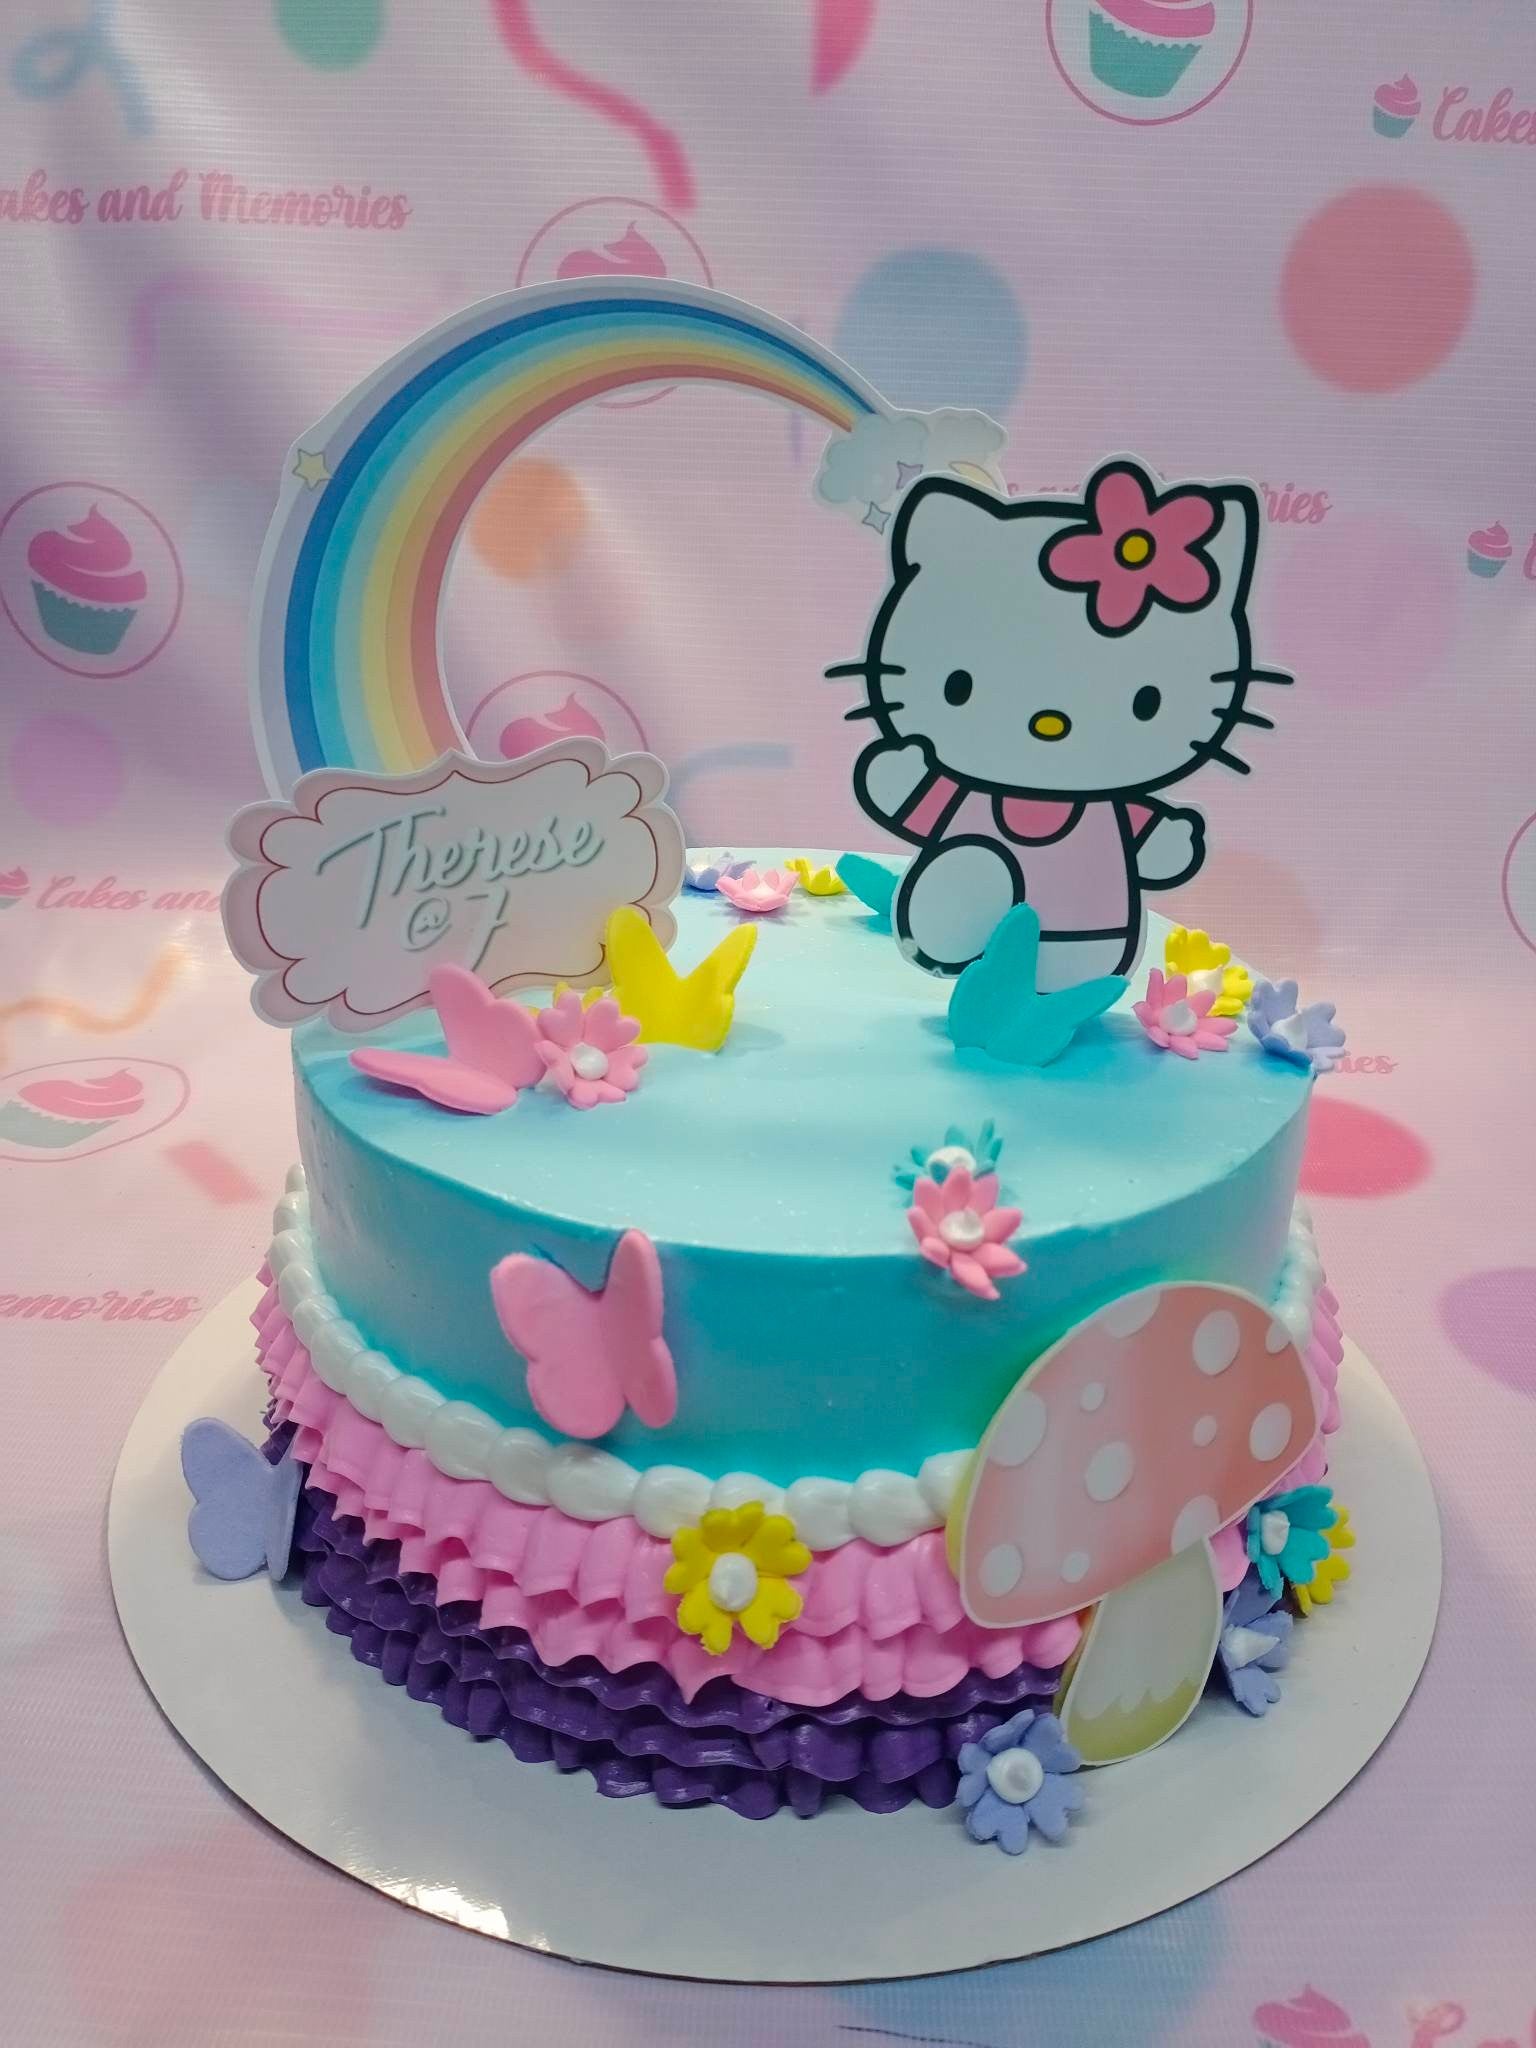 This beautiful Hello Kitty Cake is decorated with colorful rainbow designs and a kitty cat figure. The custom cake is perfect for any birthday celebration or special occasion. It is sure to delight children and adults alike.